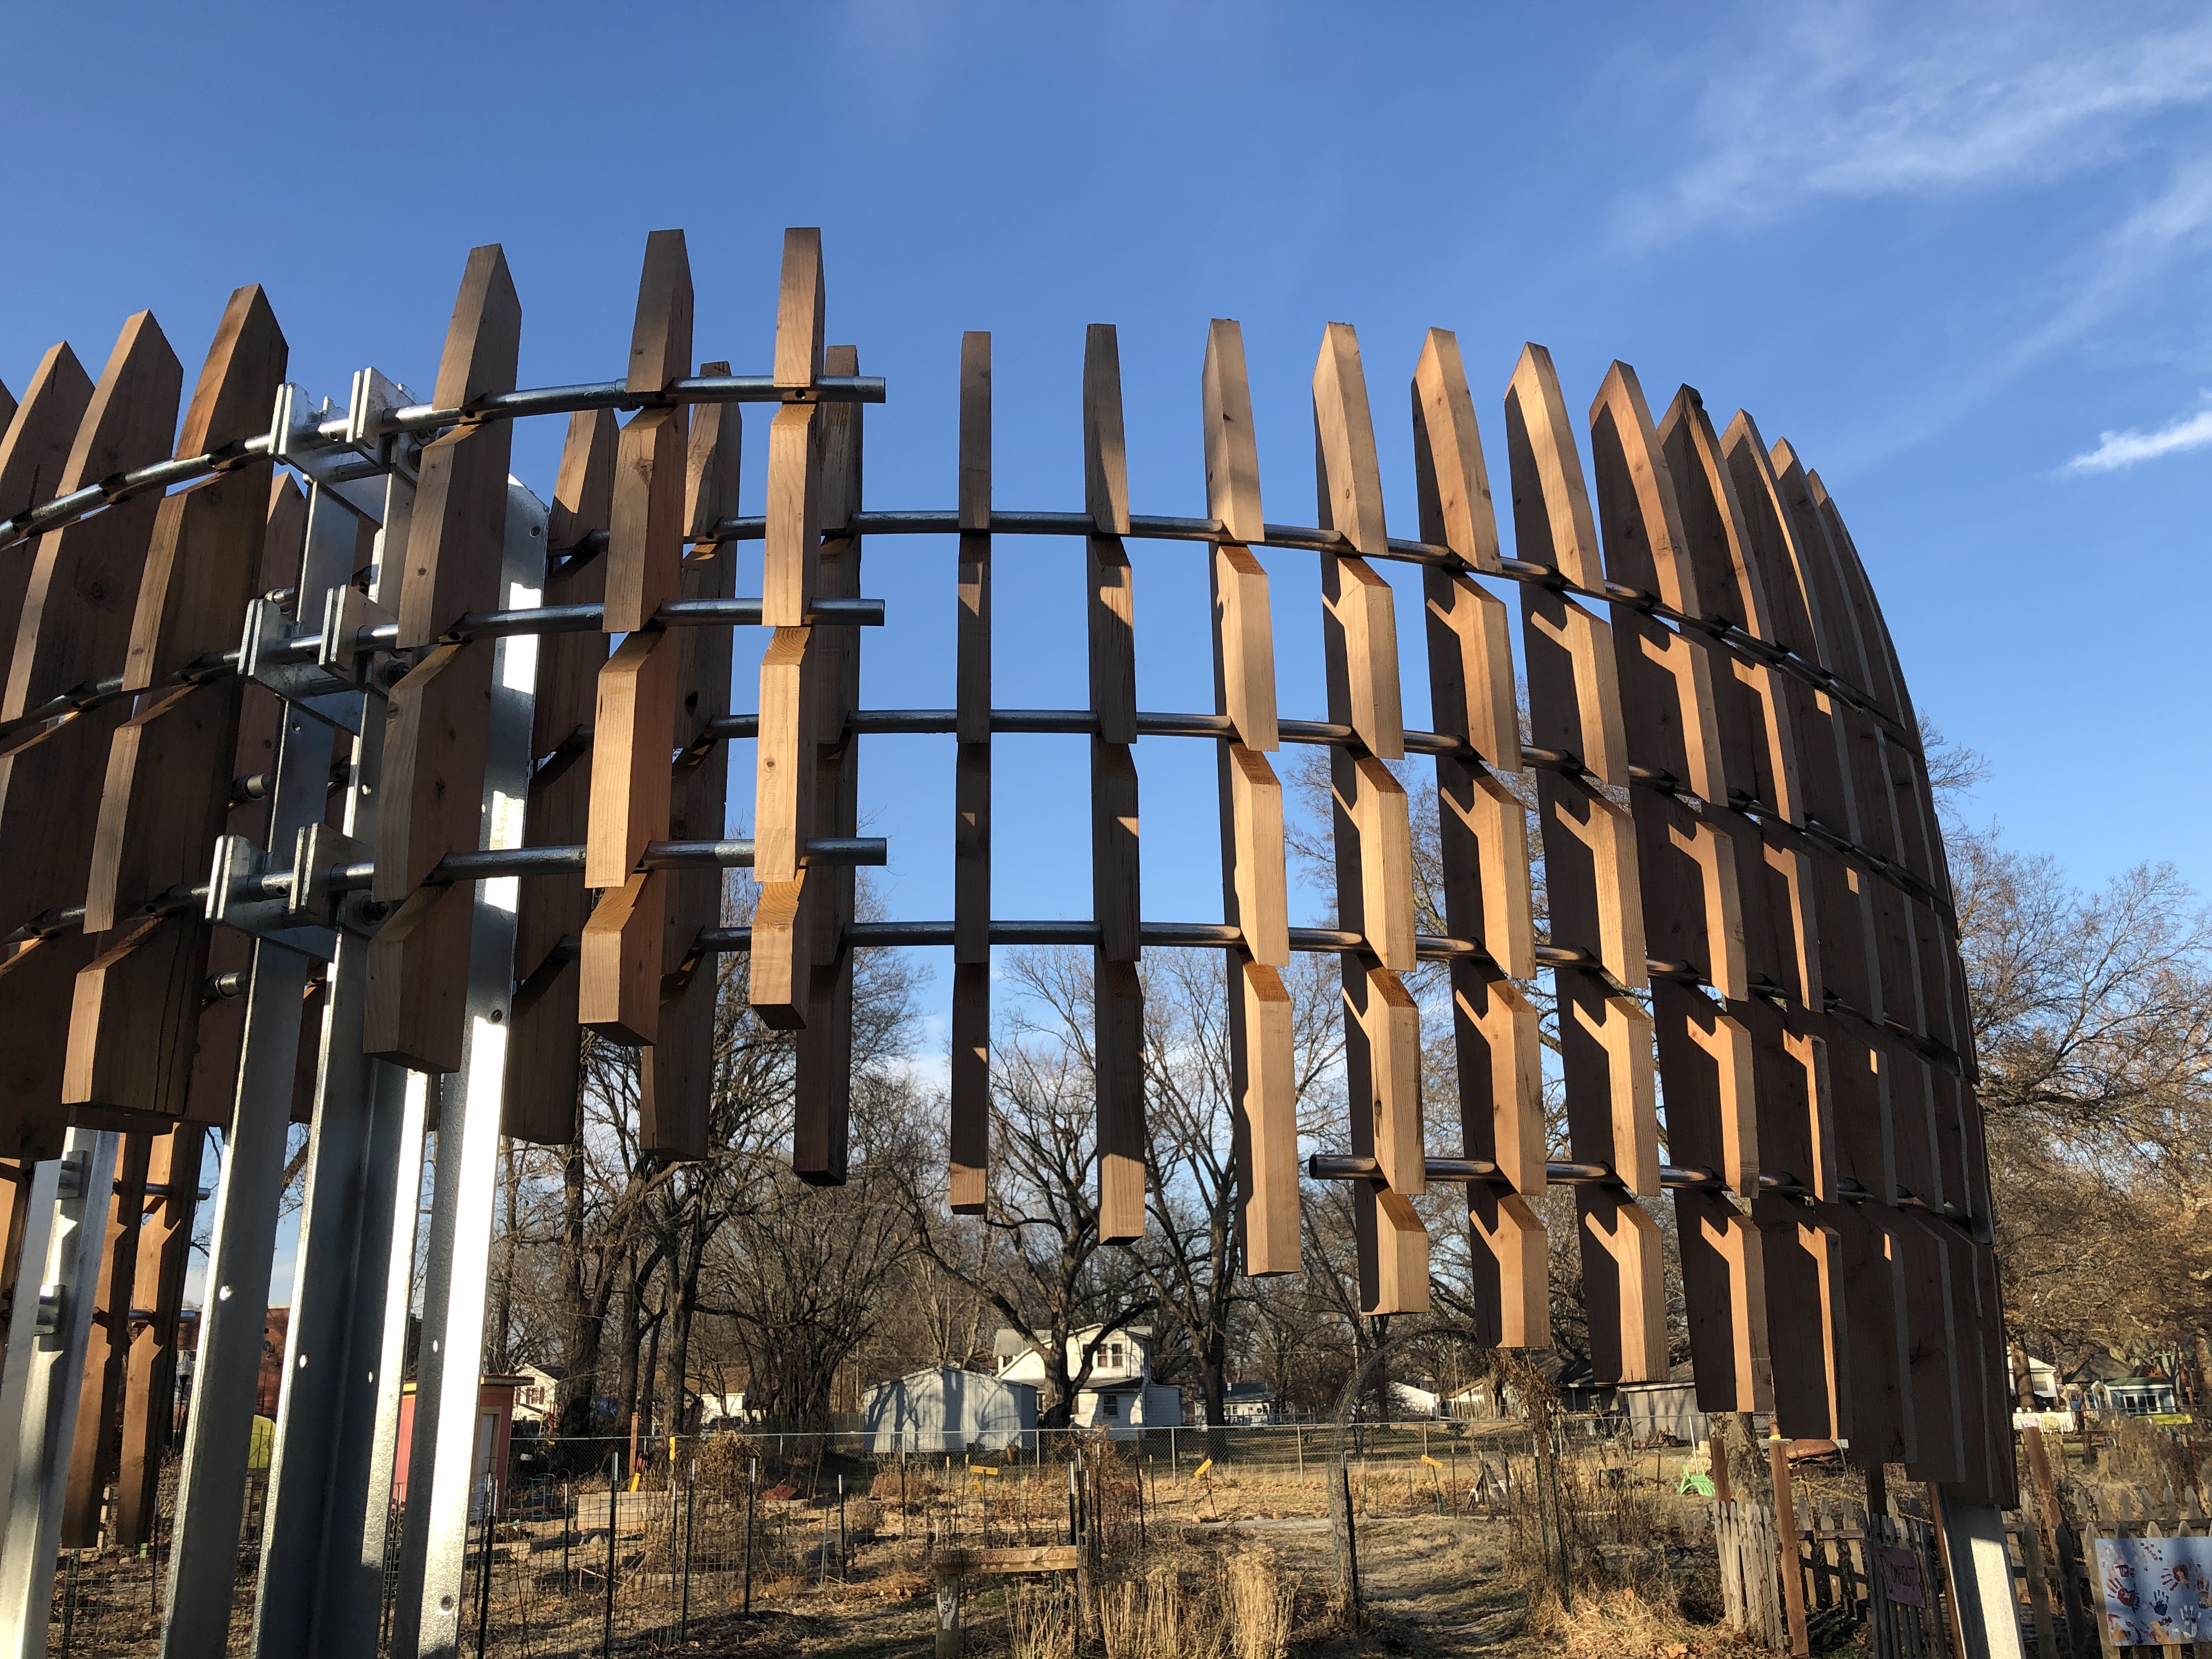 Repetitive wood fins hung on steel structure